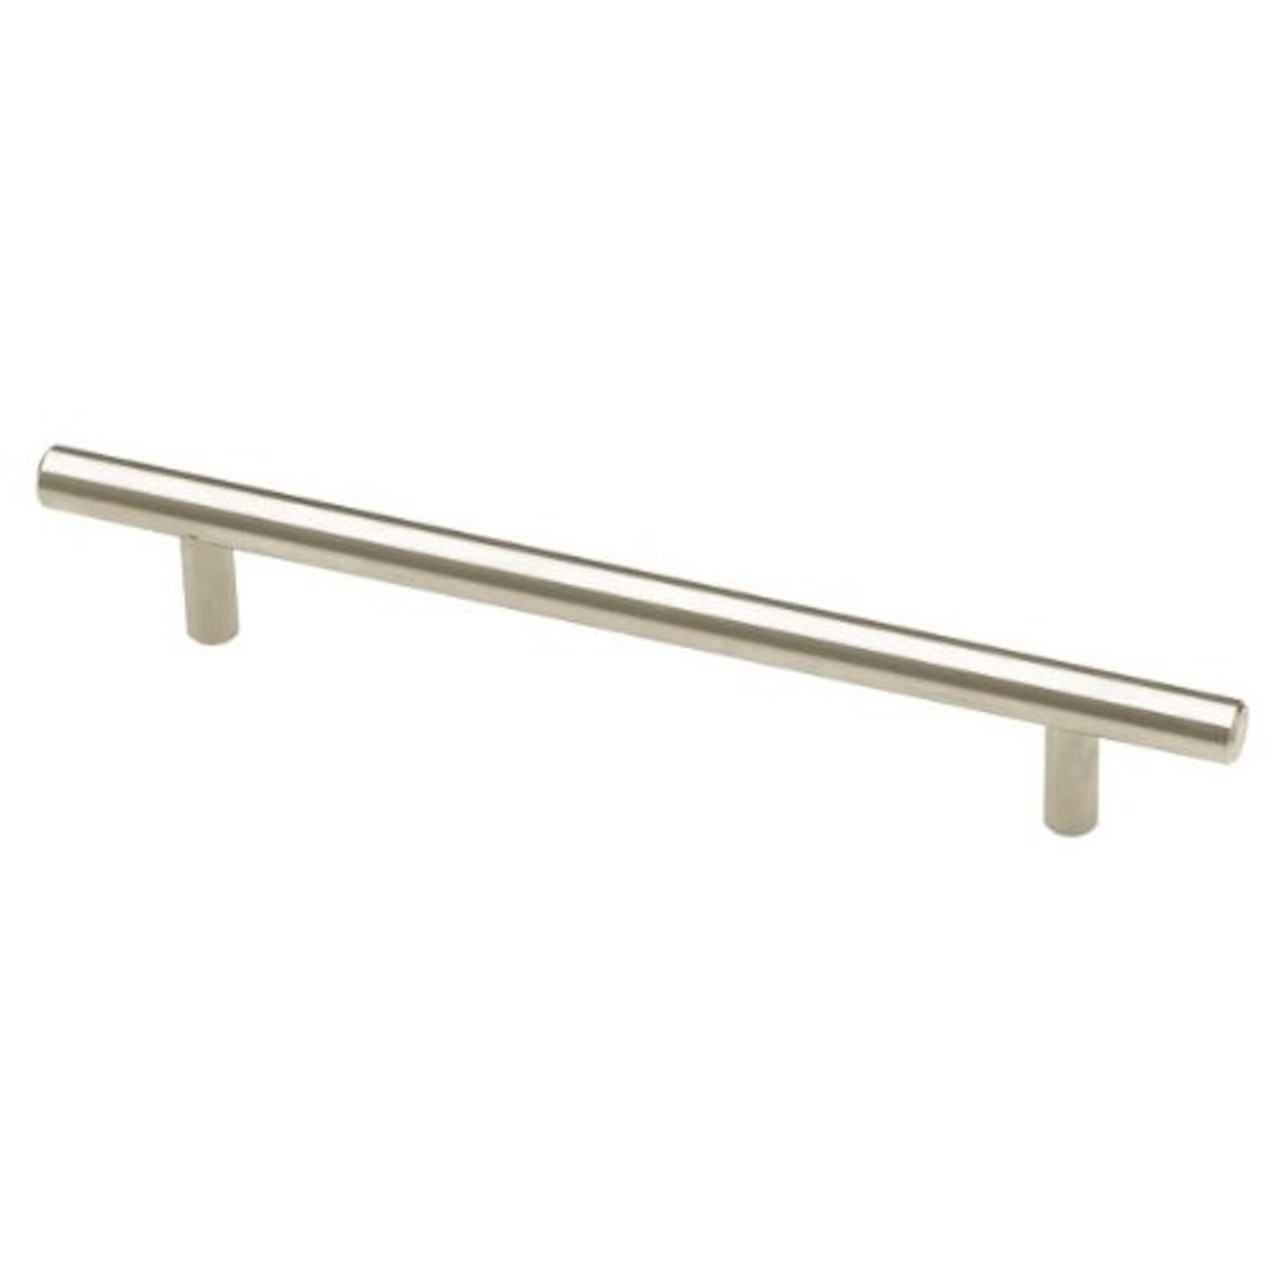 Brainerd P01014-SS-B 7 1/2" (190mm) Stainless Steel Cabinet Drawer Bar Pull  10 Pack